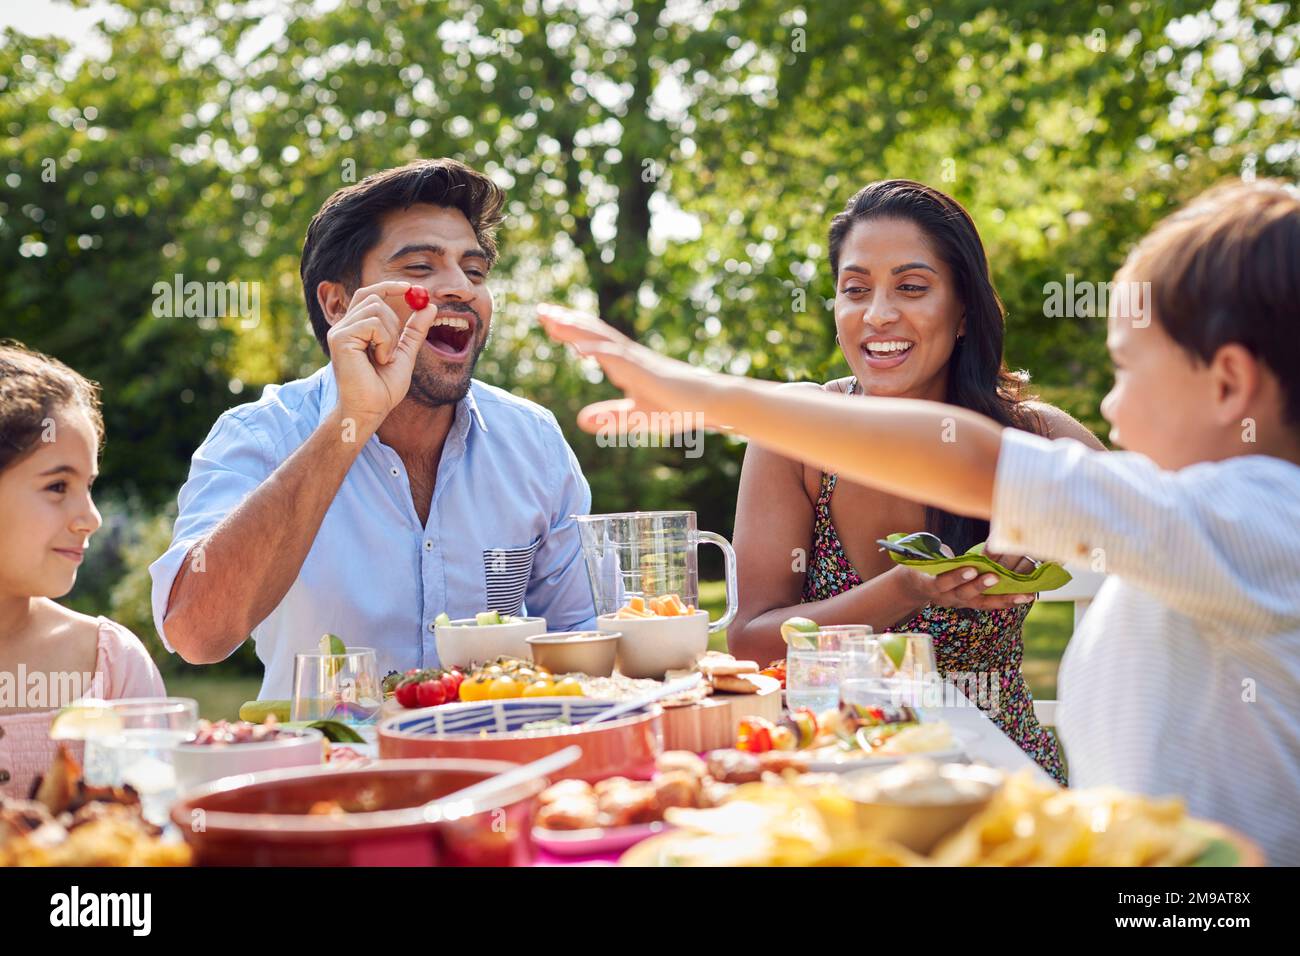 Family Eating Outdoor Meal In Garden At Home Together Stock Photo